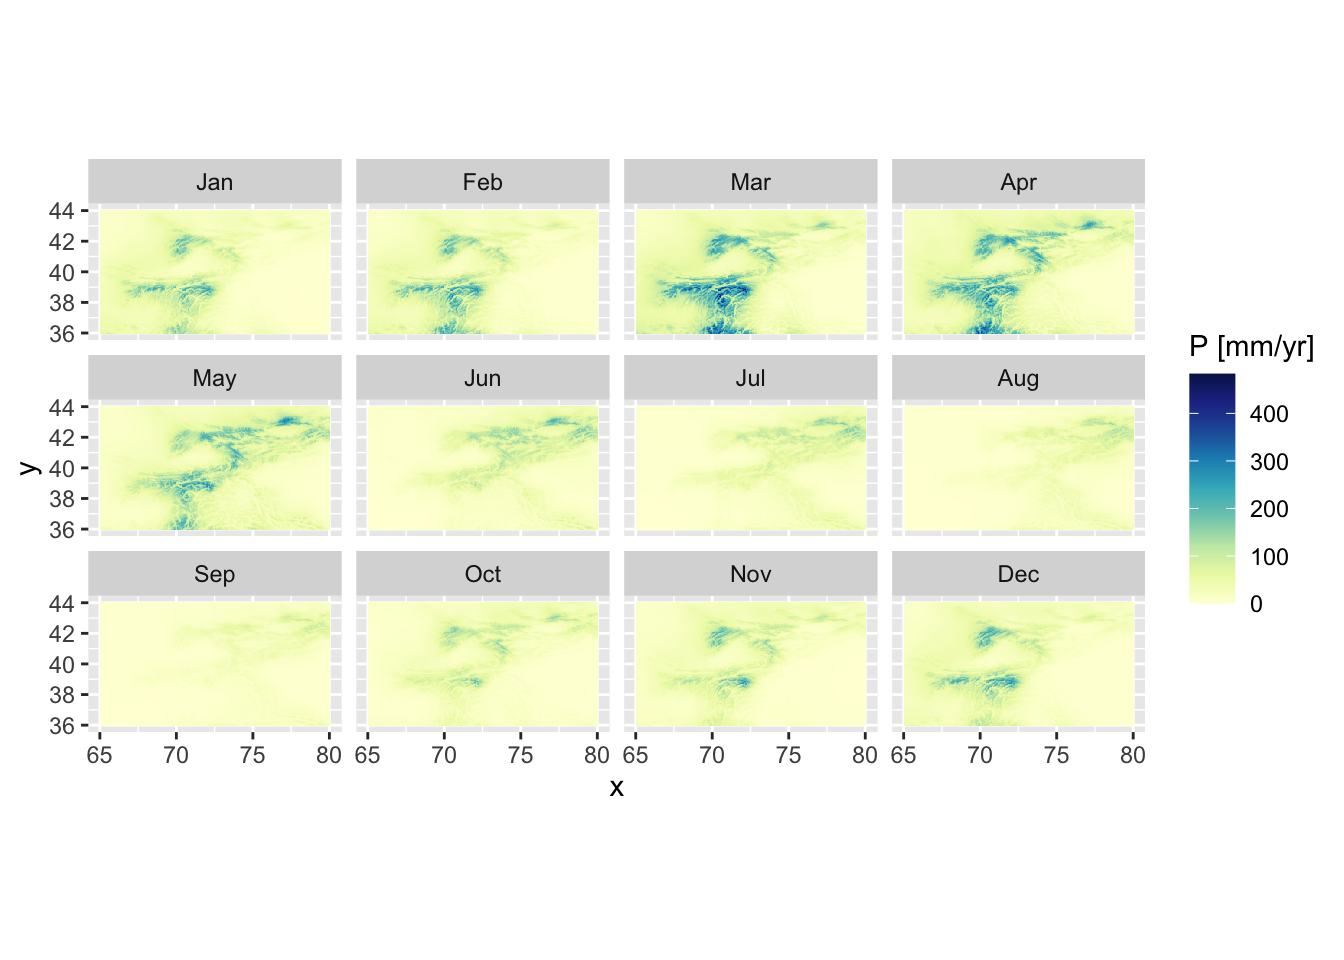 CHELSA v1.2.1 mean monthly precipitation climatology is shown.